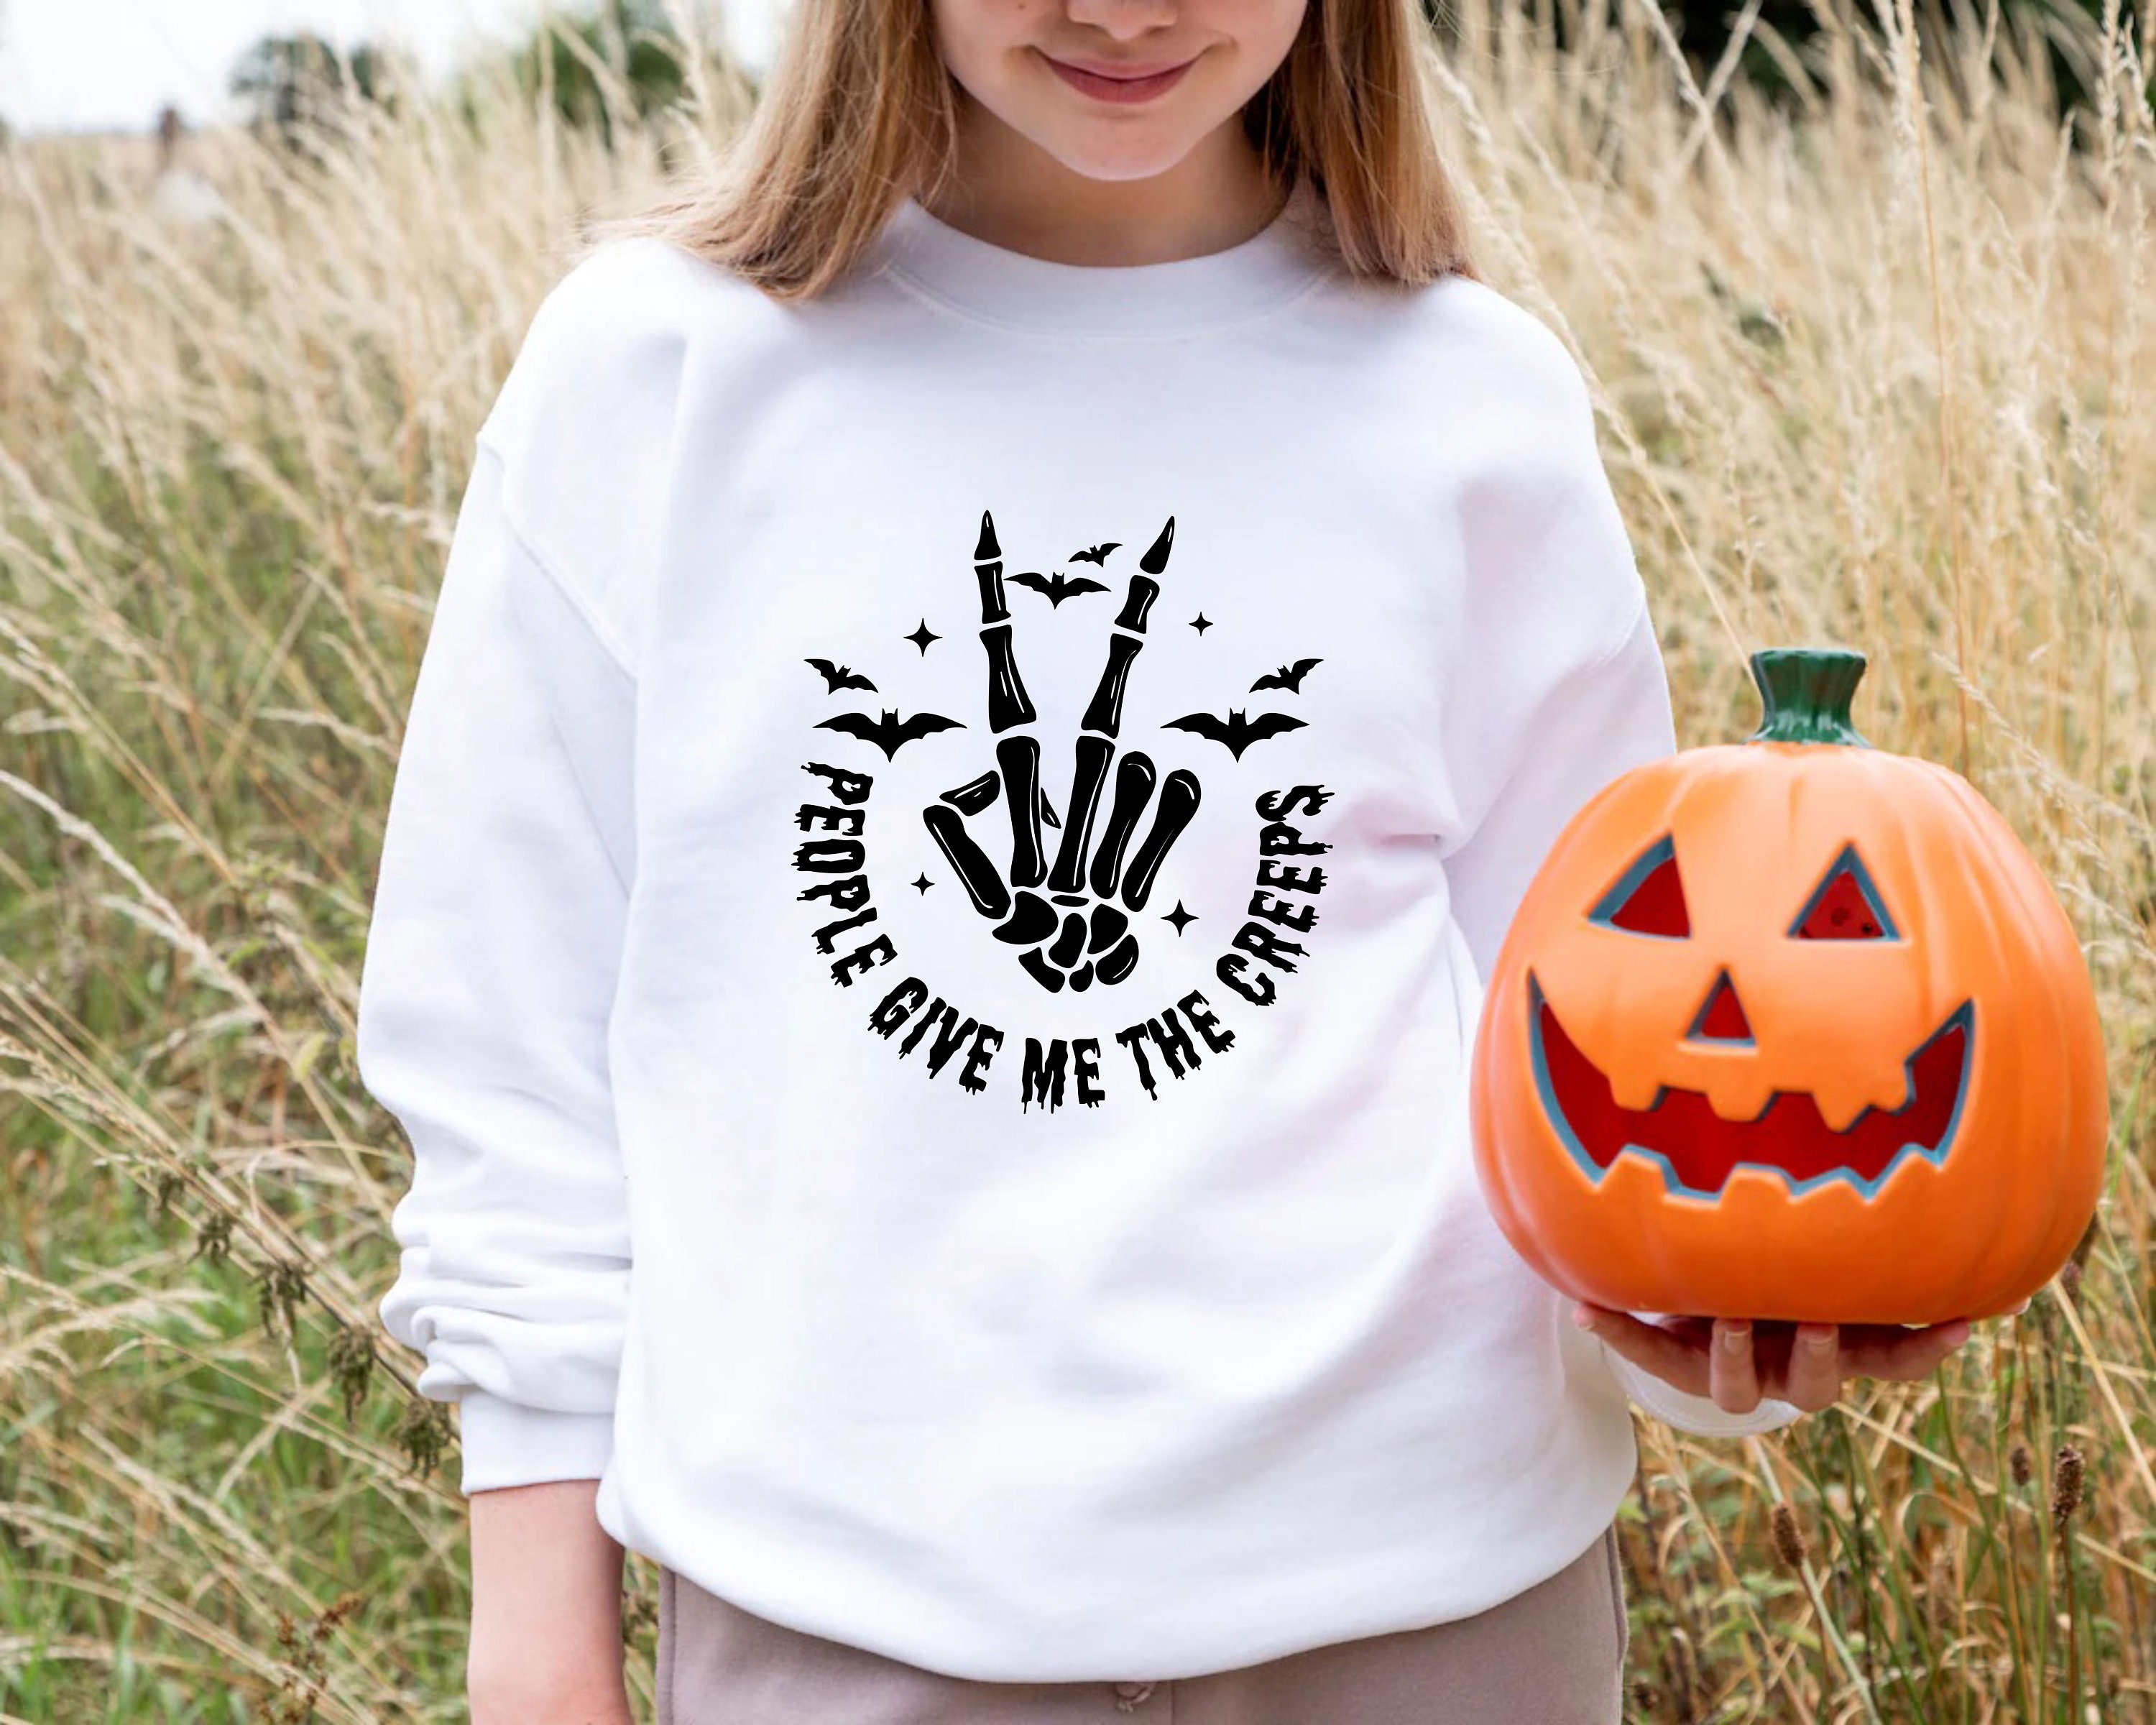 Discover People Give Me The Creeps Sweatshirt, Skeleton Hands, Peace Symbol, Scary Season Sweater, Bats Motif, Spooky Design, Witchy Halloween Spirit